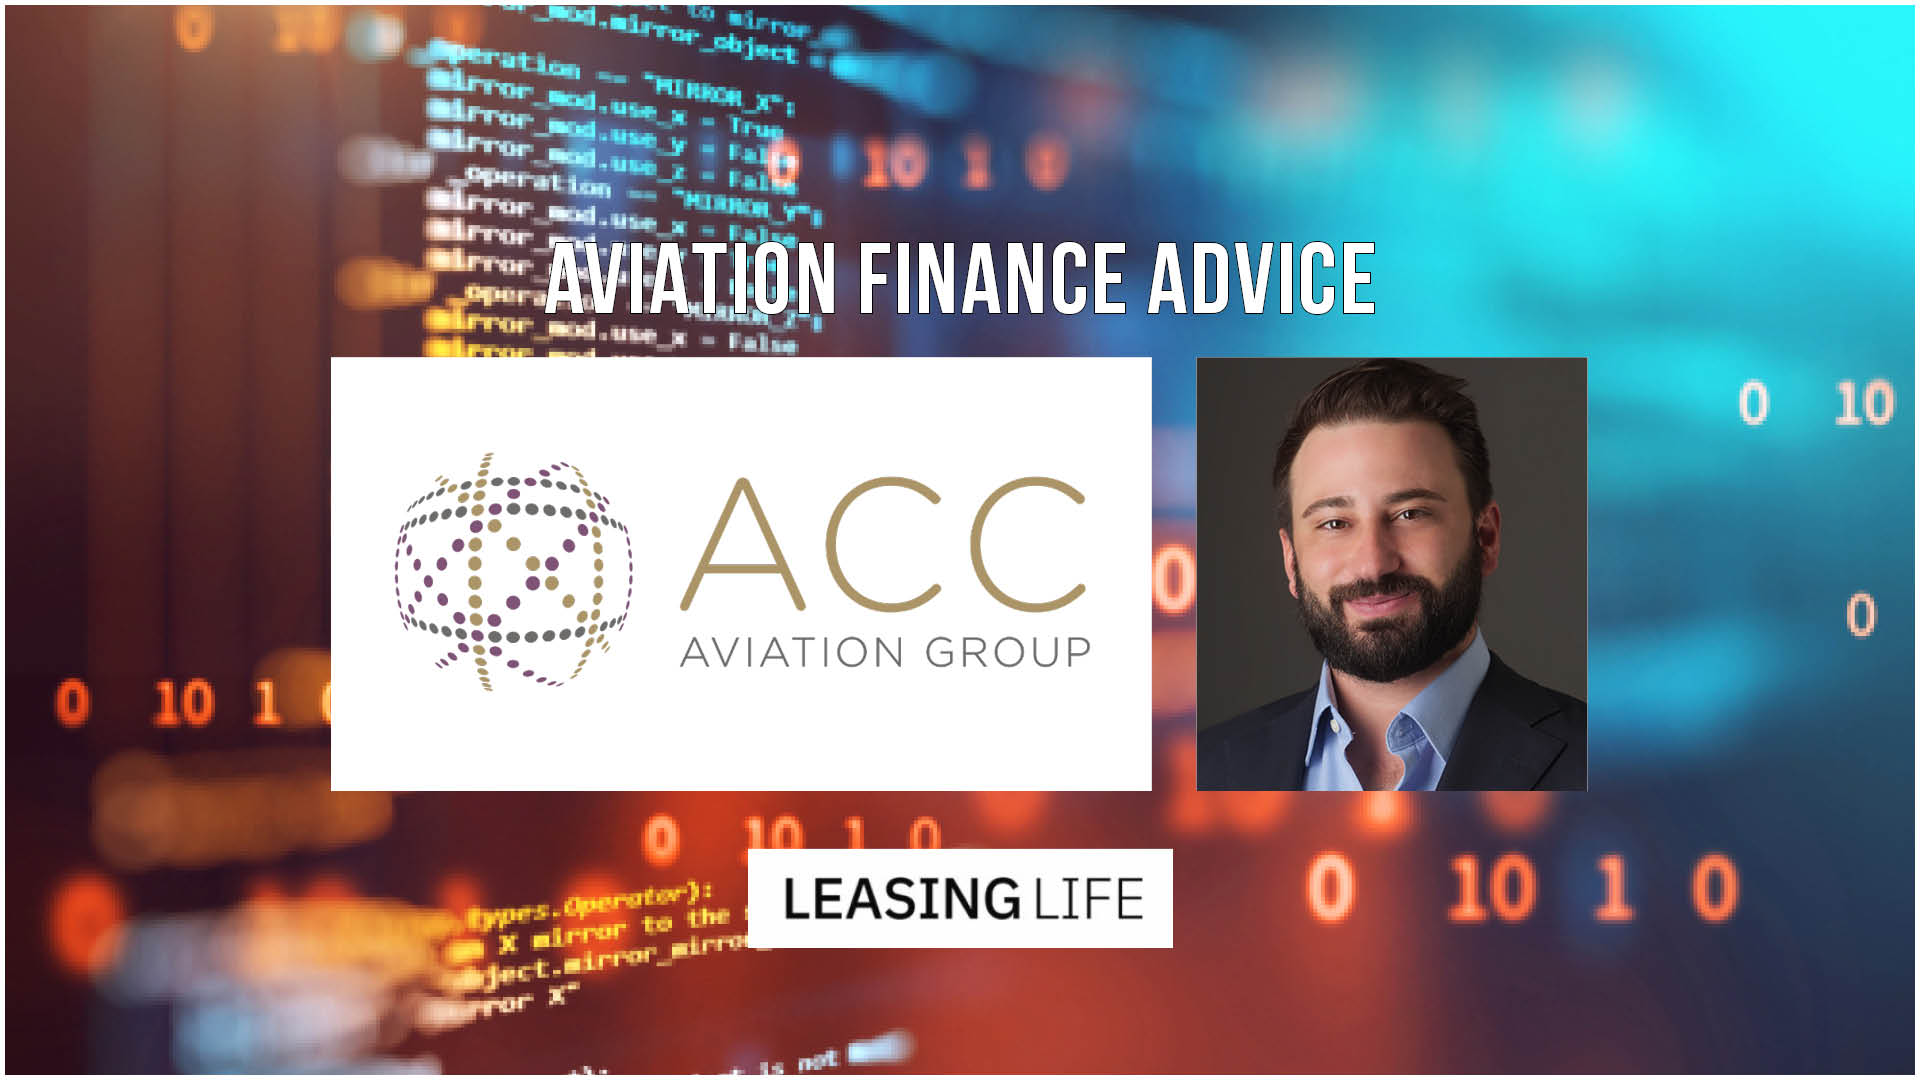 Global aviation business ACC Aviation is expanding their service offerings with the appointment of in-house aviation finance specialist Viktor Berta